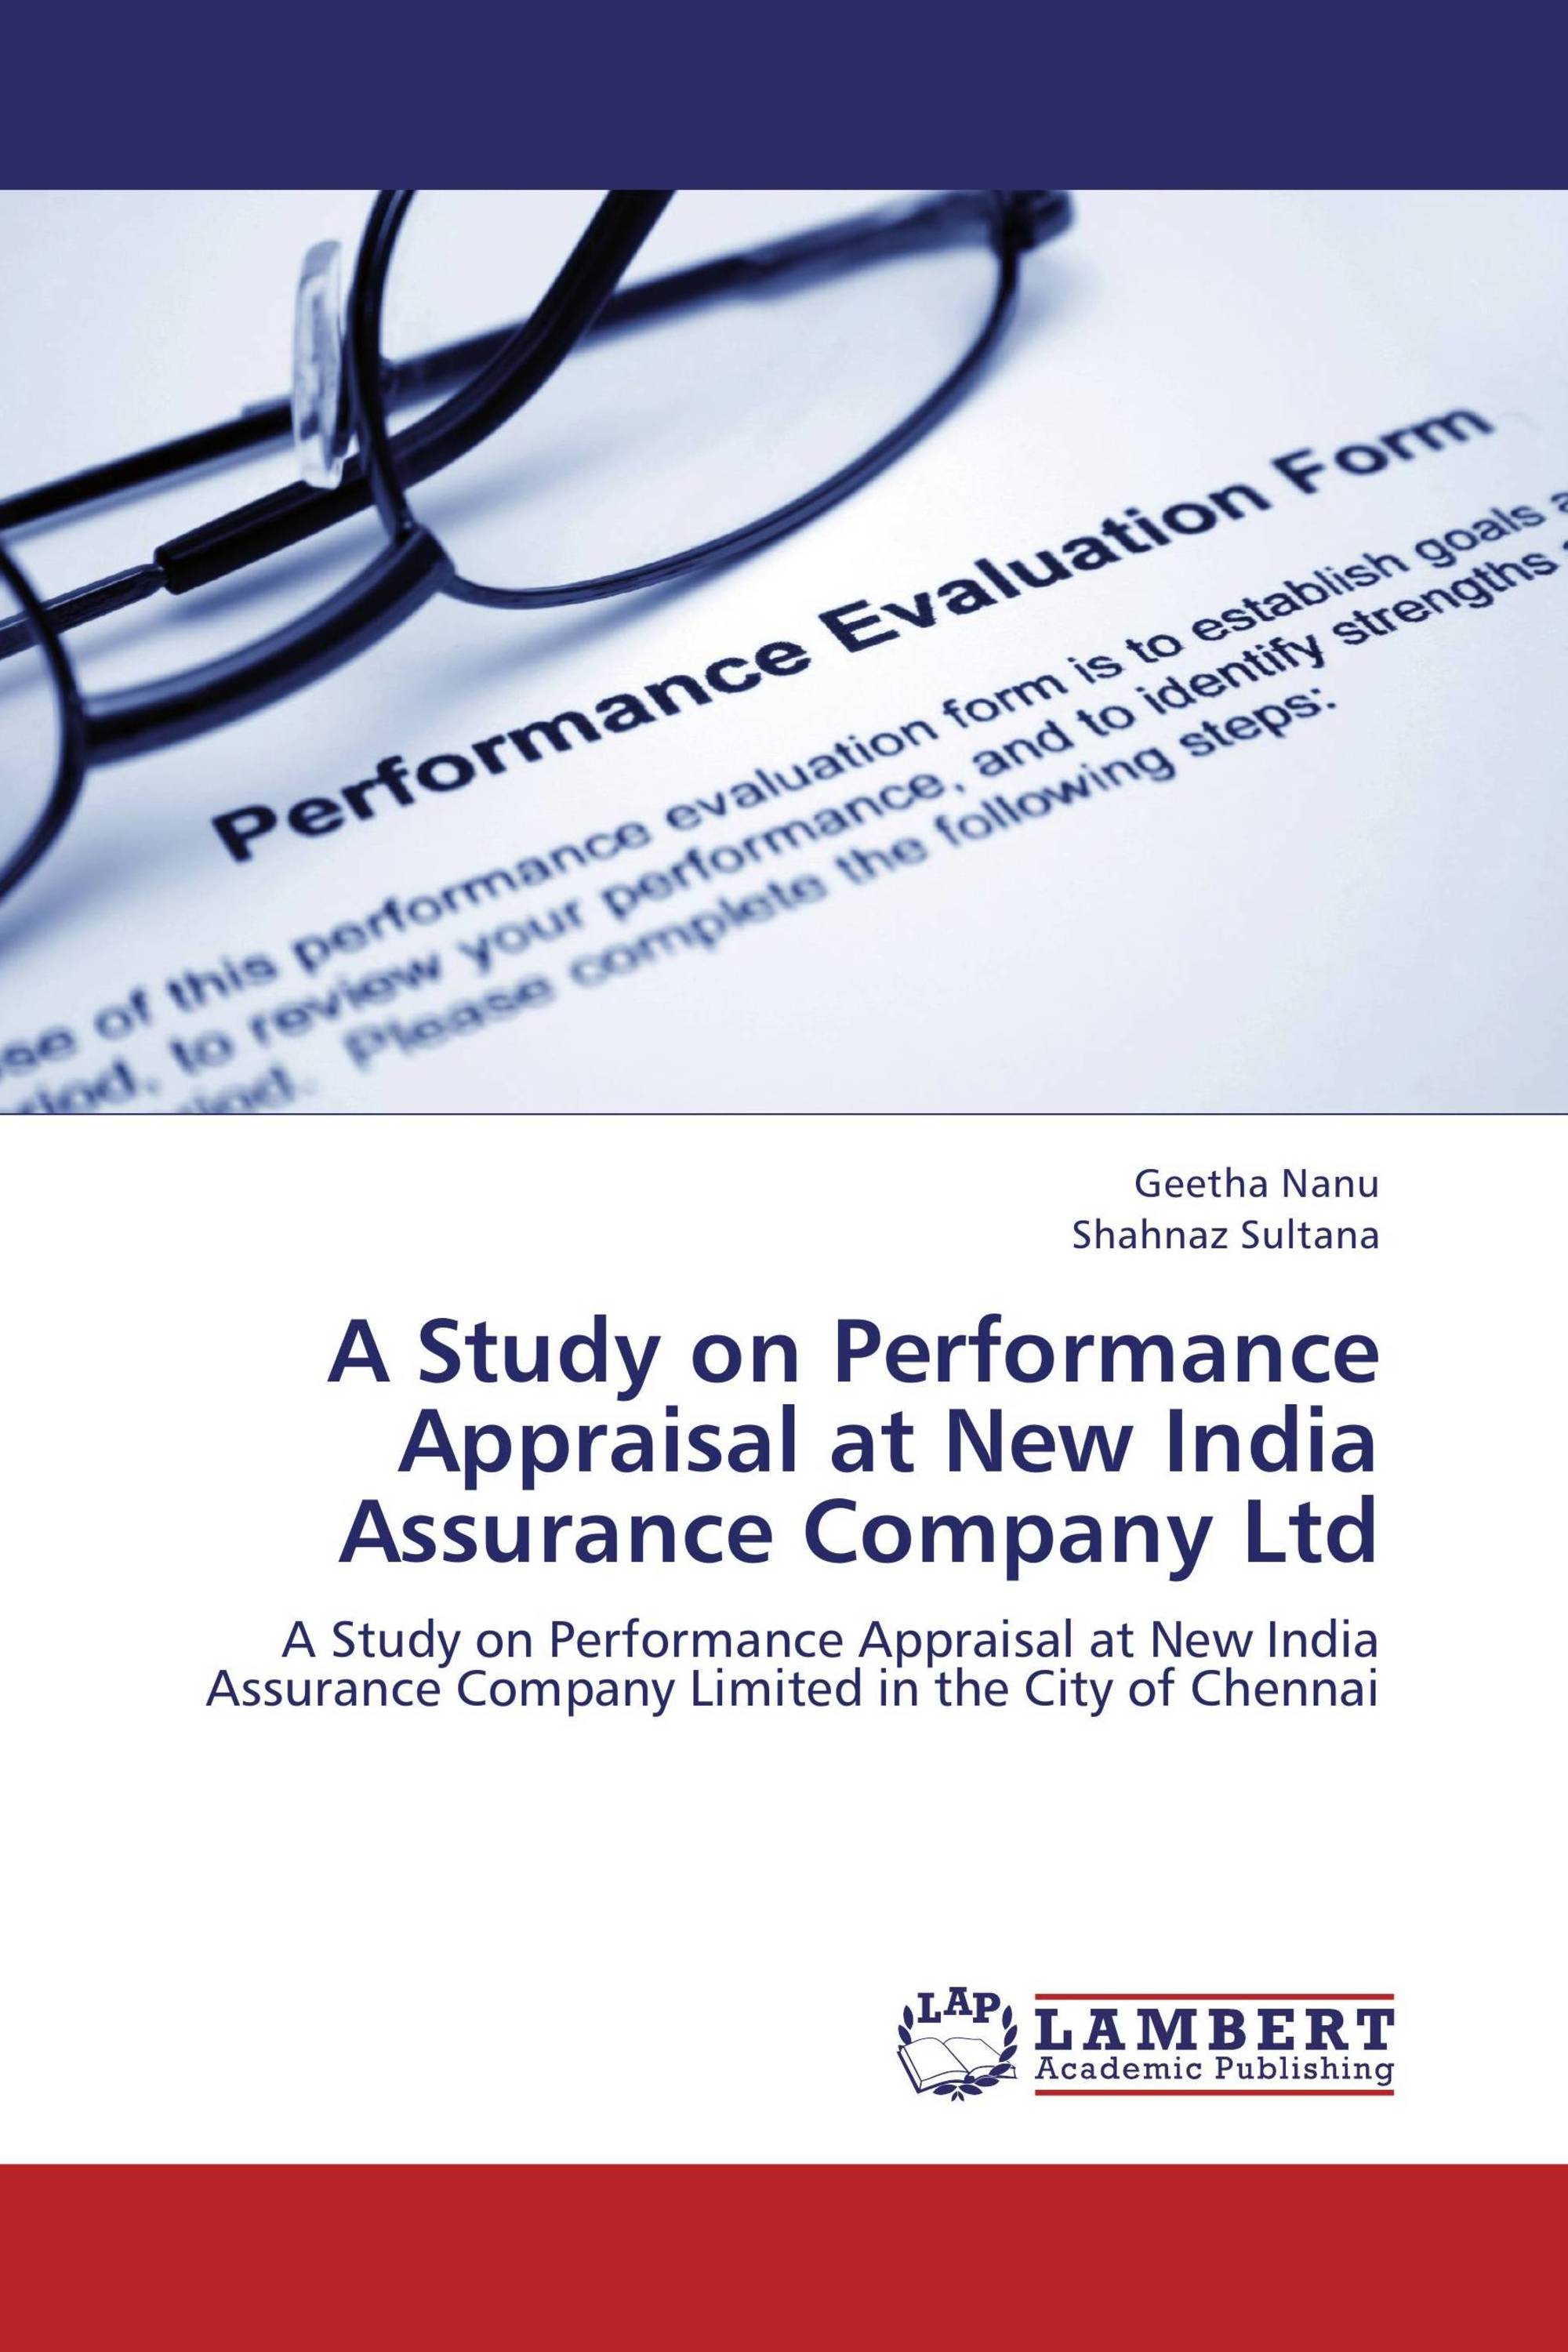 case study on performance appraisal in indian companies